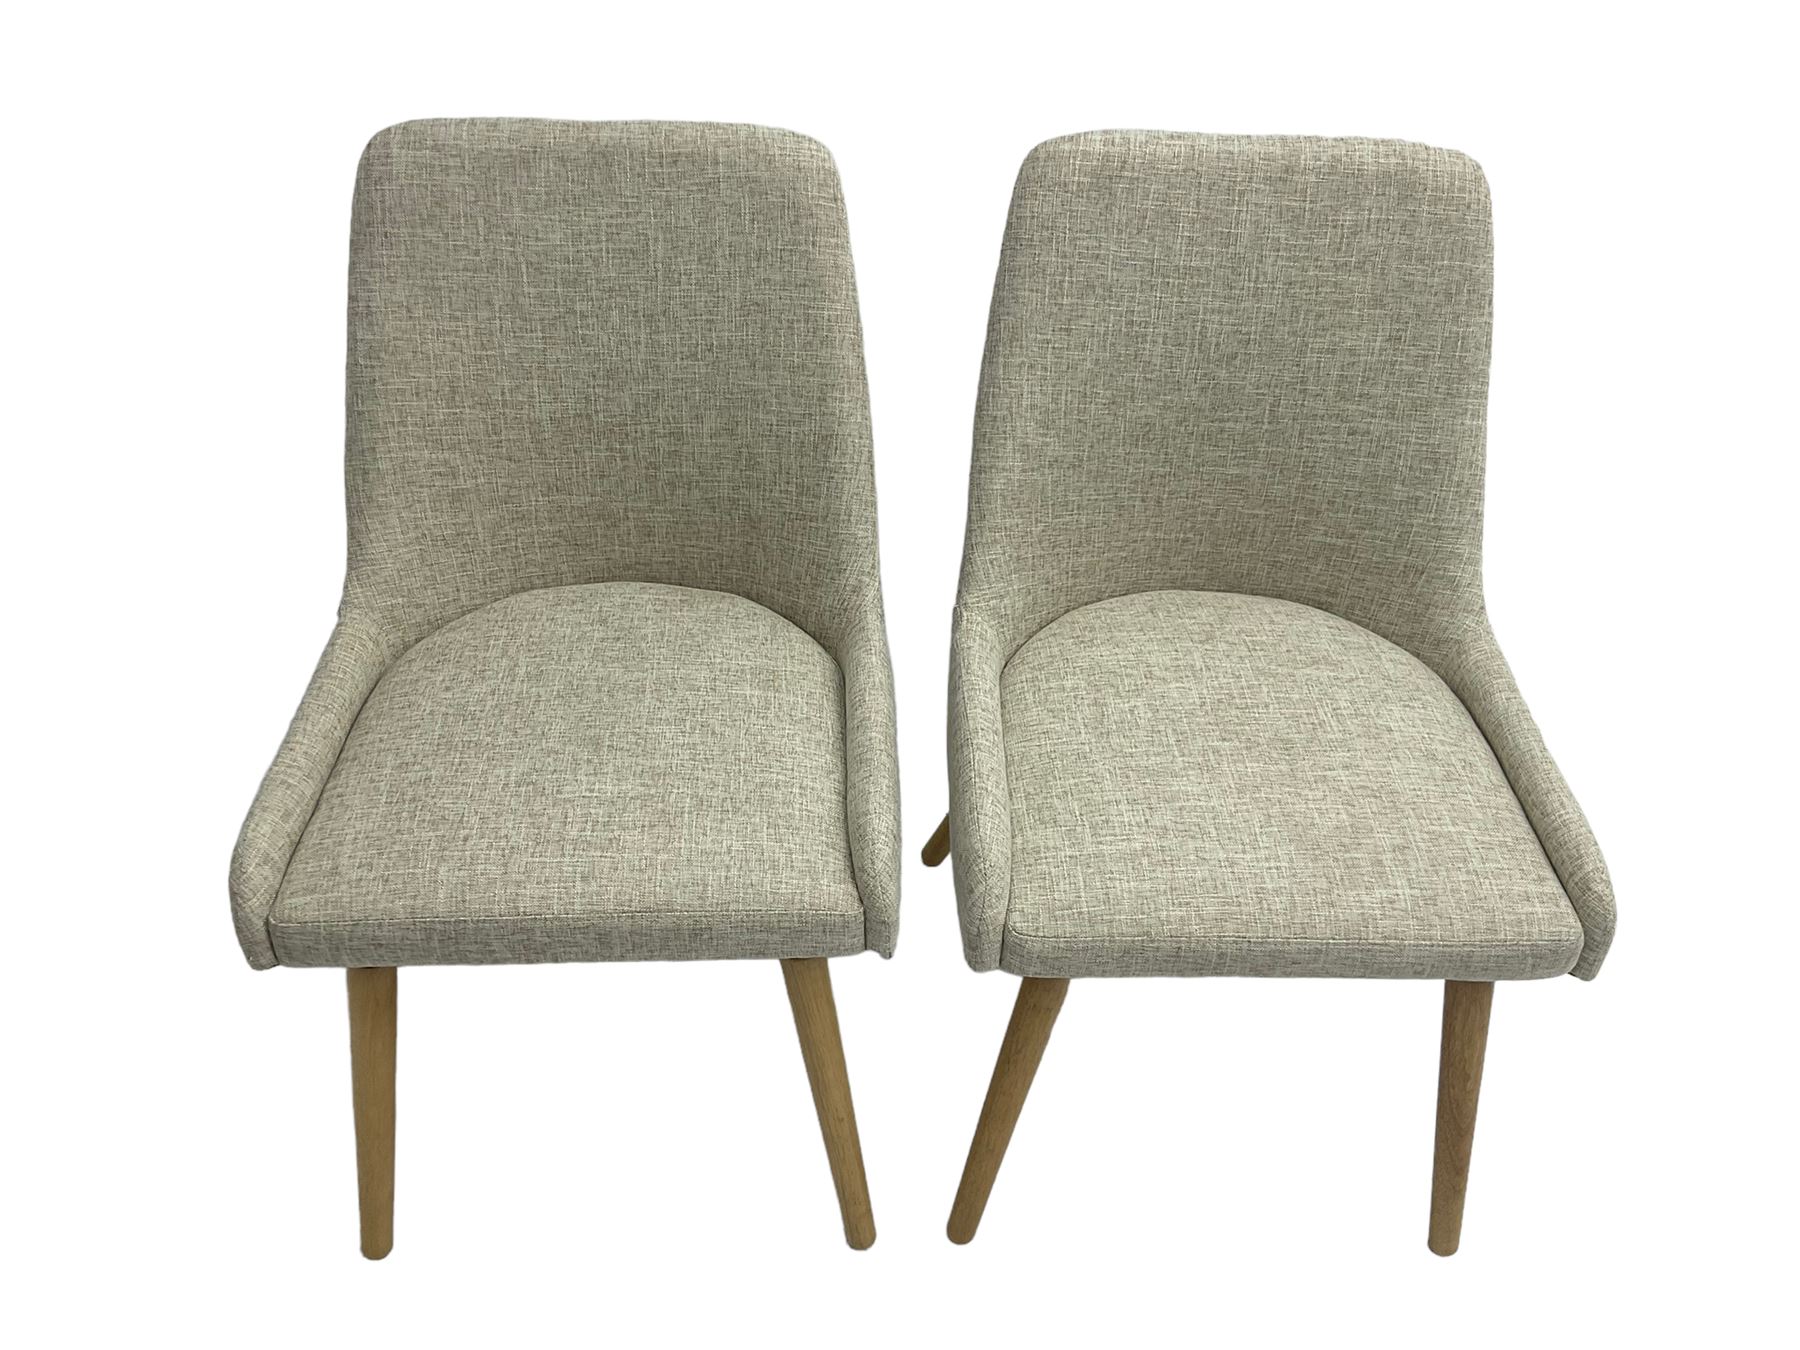 Pair contemporary side chairs - Image 2 of 7